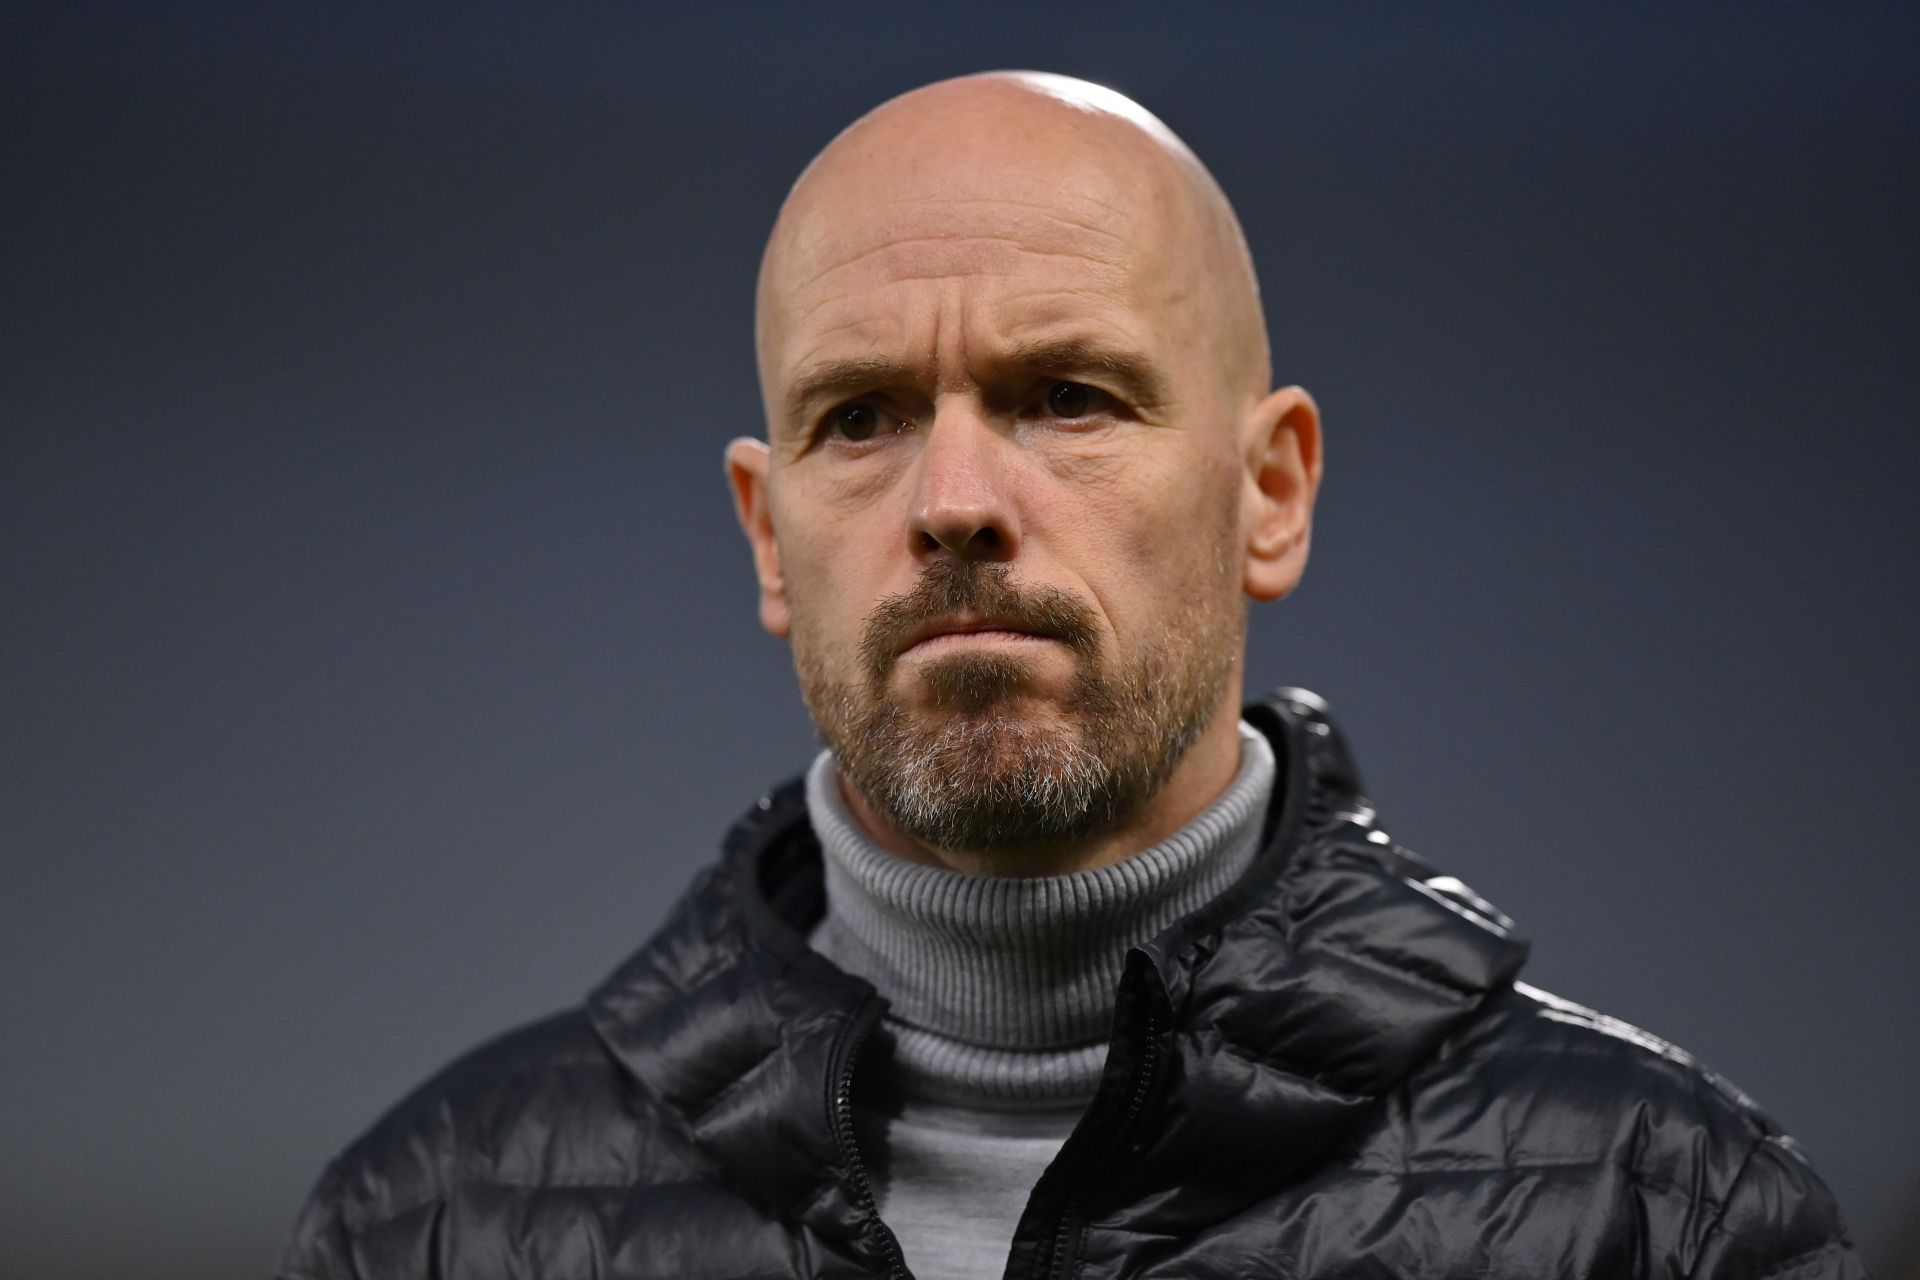 Ten Hag is concentrating on the future